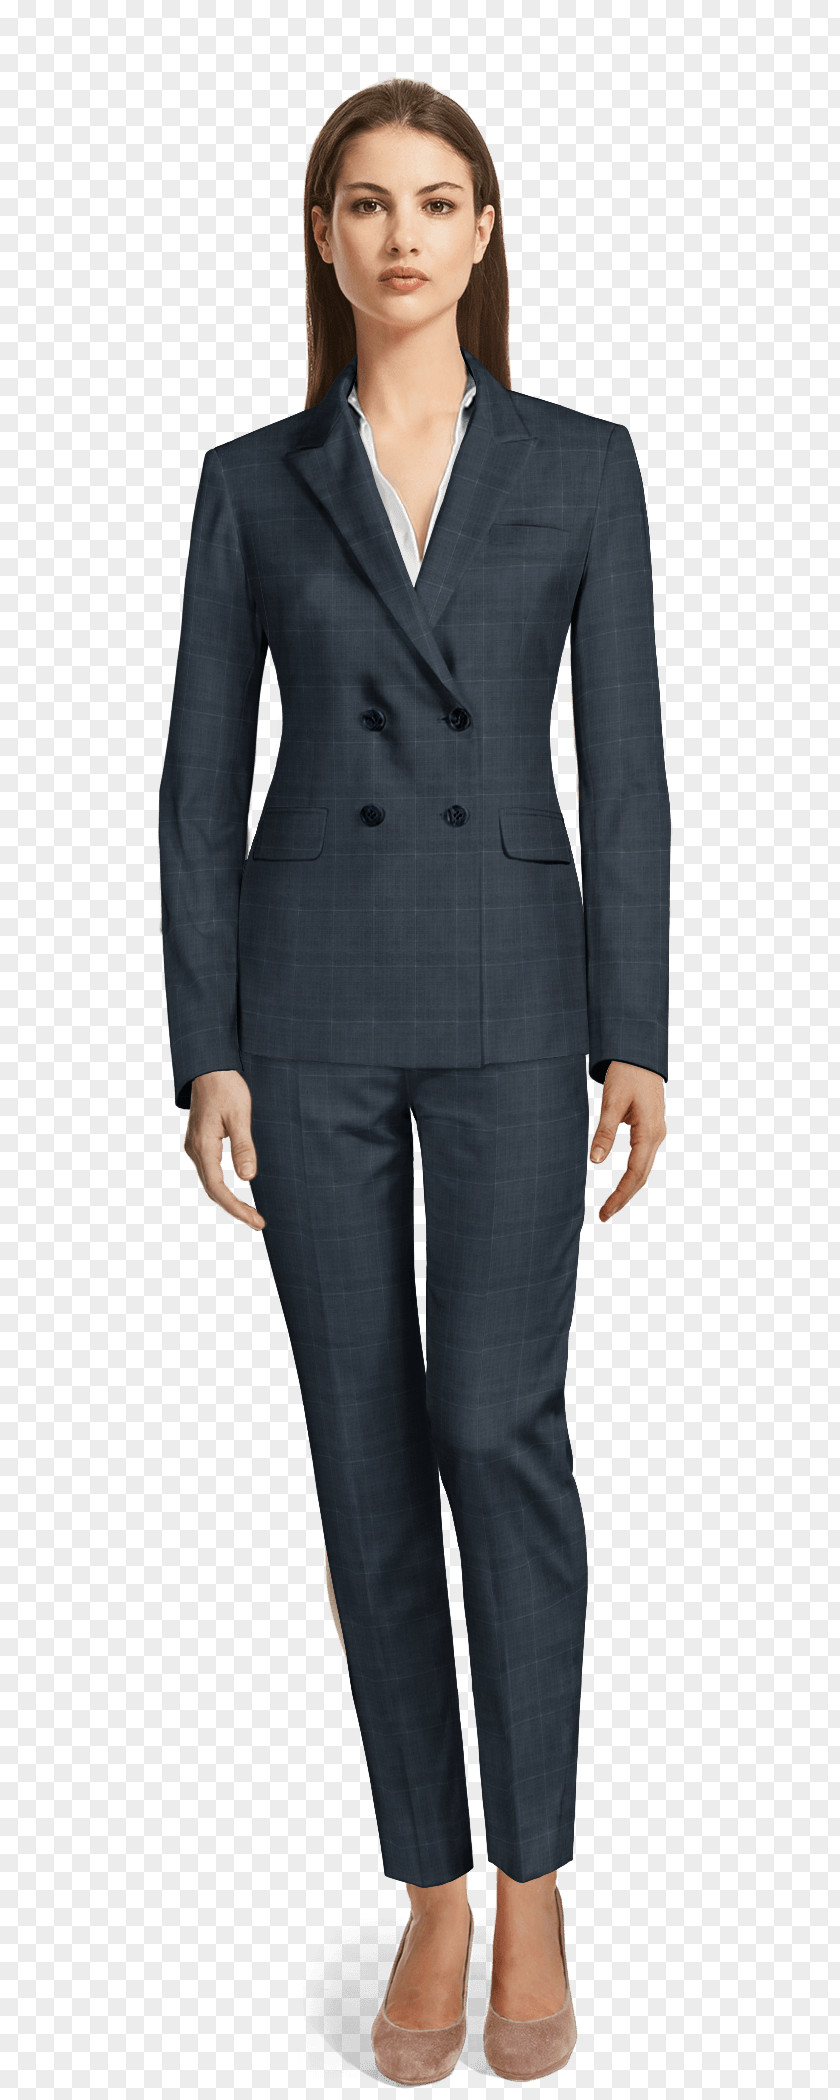 Female Suit Pant Suits Double-breasted Clothing Blazer PNG